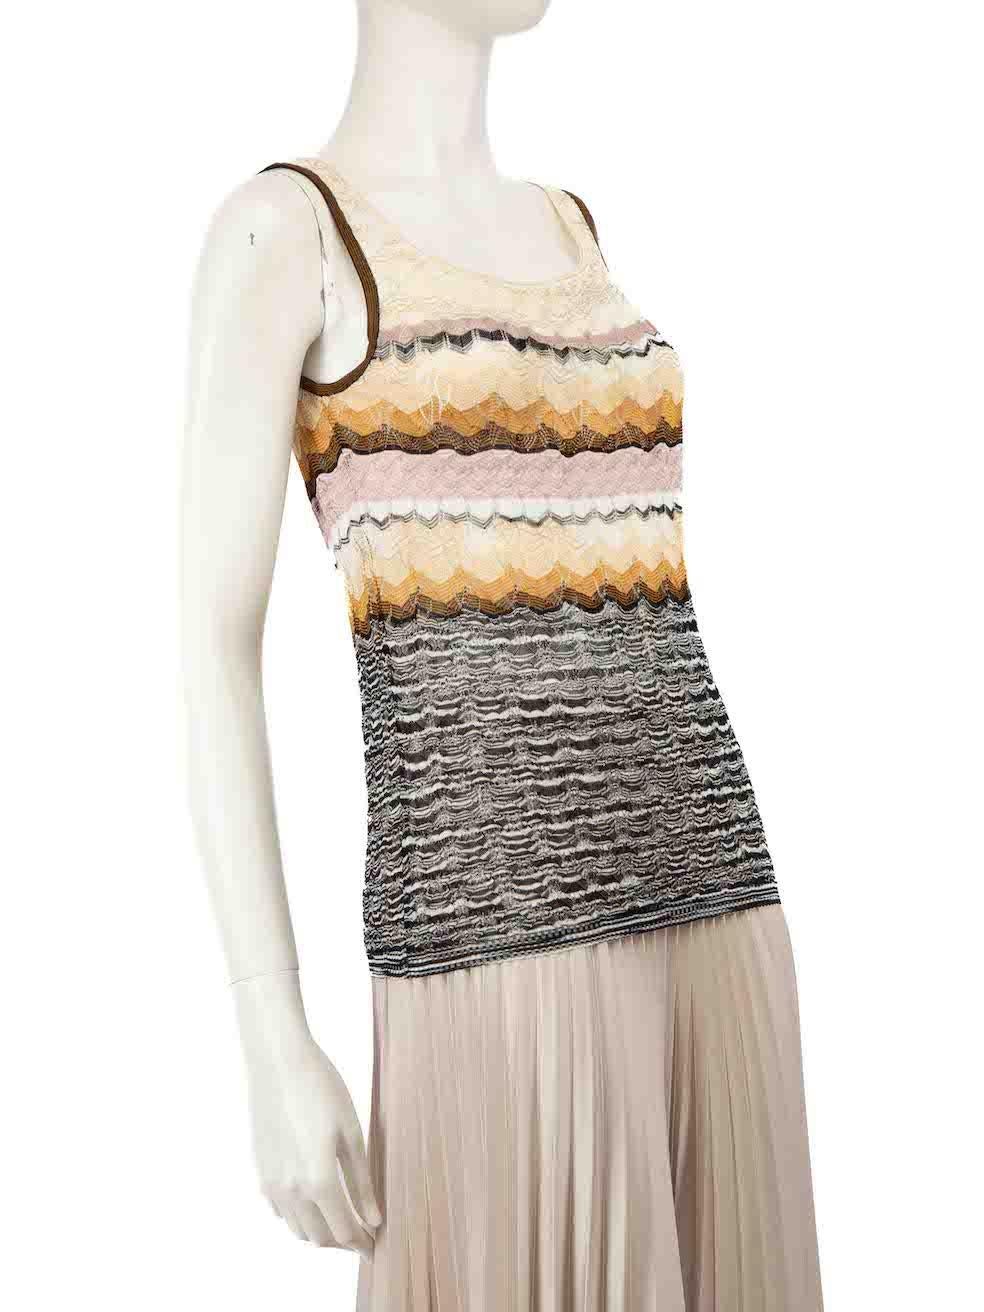 CONDITION is Very good. Minimal wear to top is evident. Minimal discolouration to centre front on this used Missoni designer resale item.
 
 
 
 Details
 
 
 Multicolour- beige tone
 
 Viscose
 
 Knit top
 
 Striped pattern
 
 Sleeveless
 
 Round